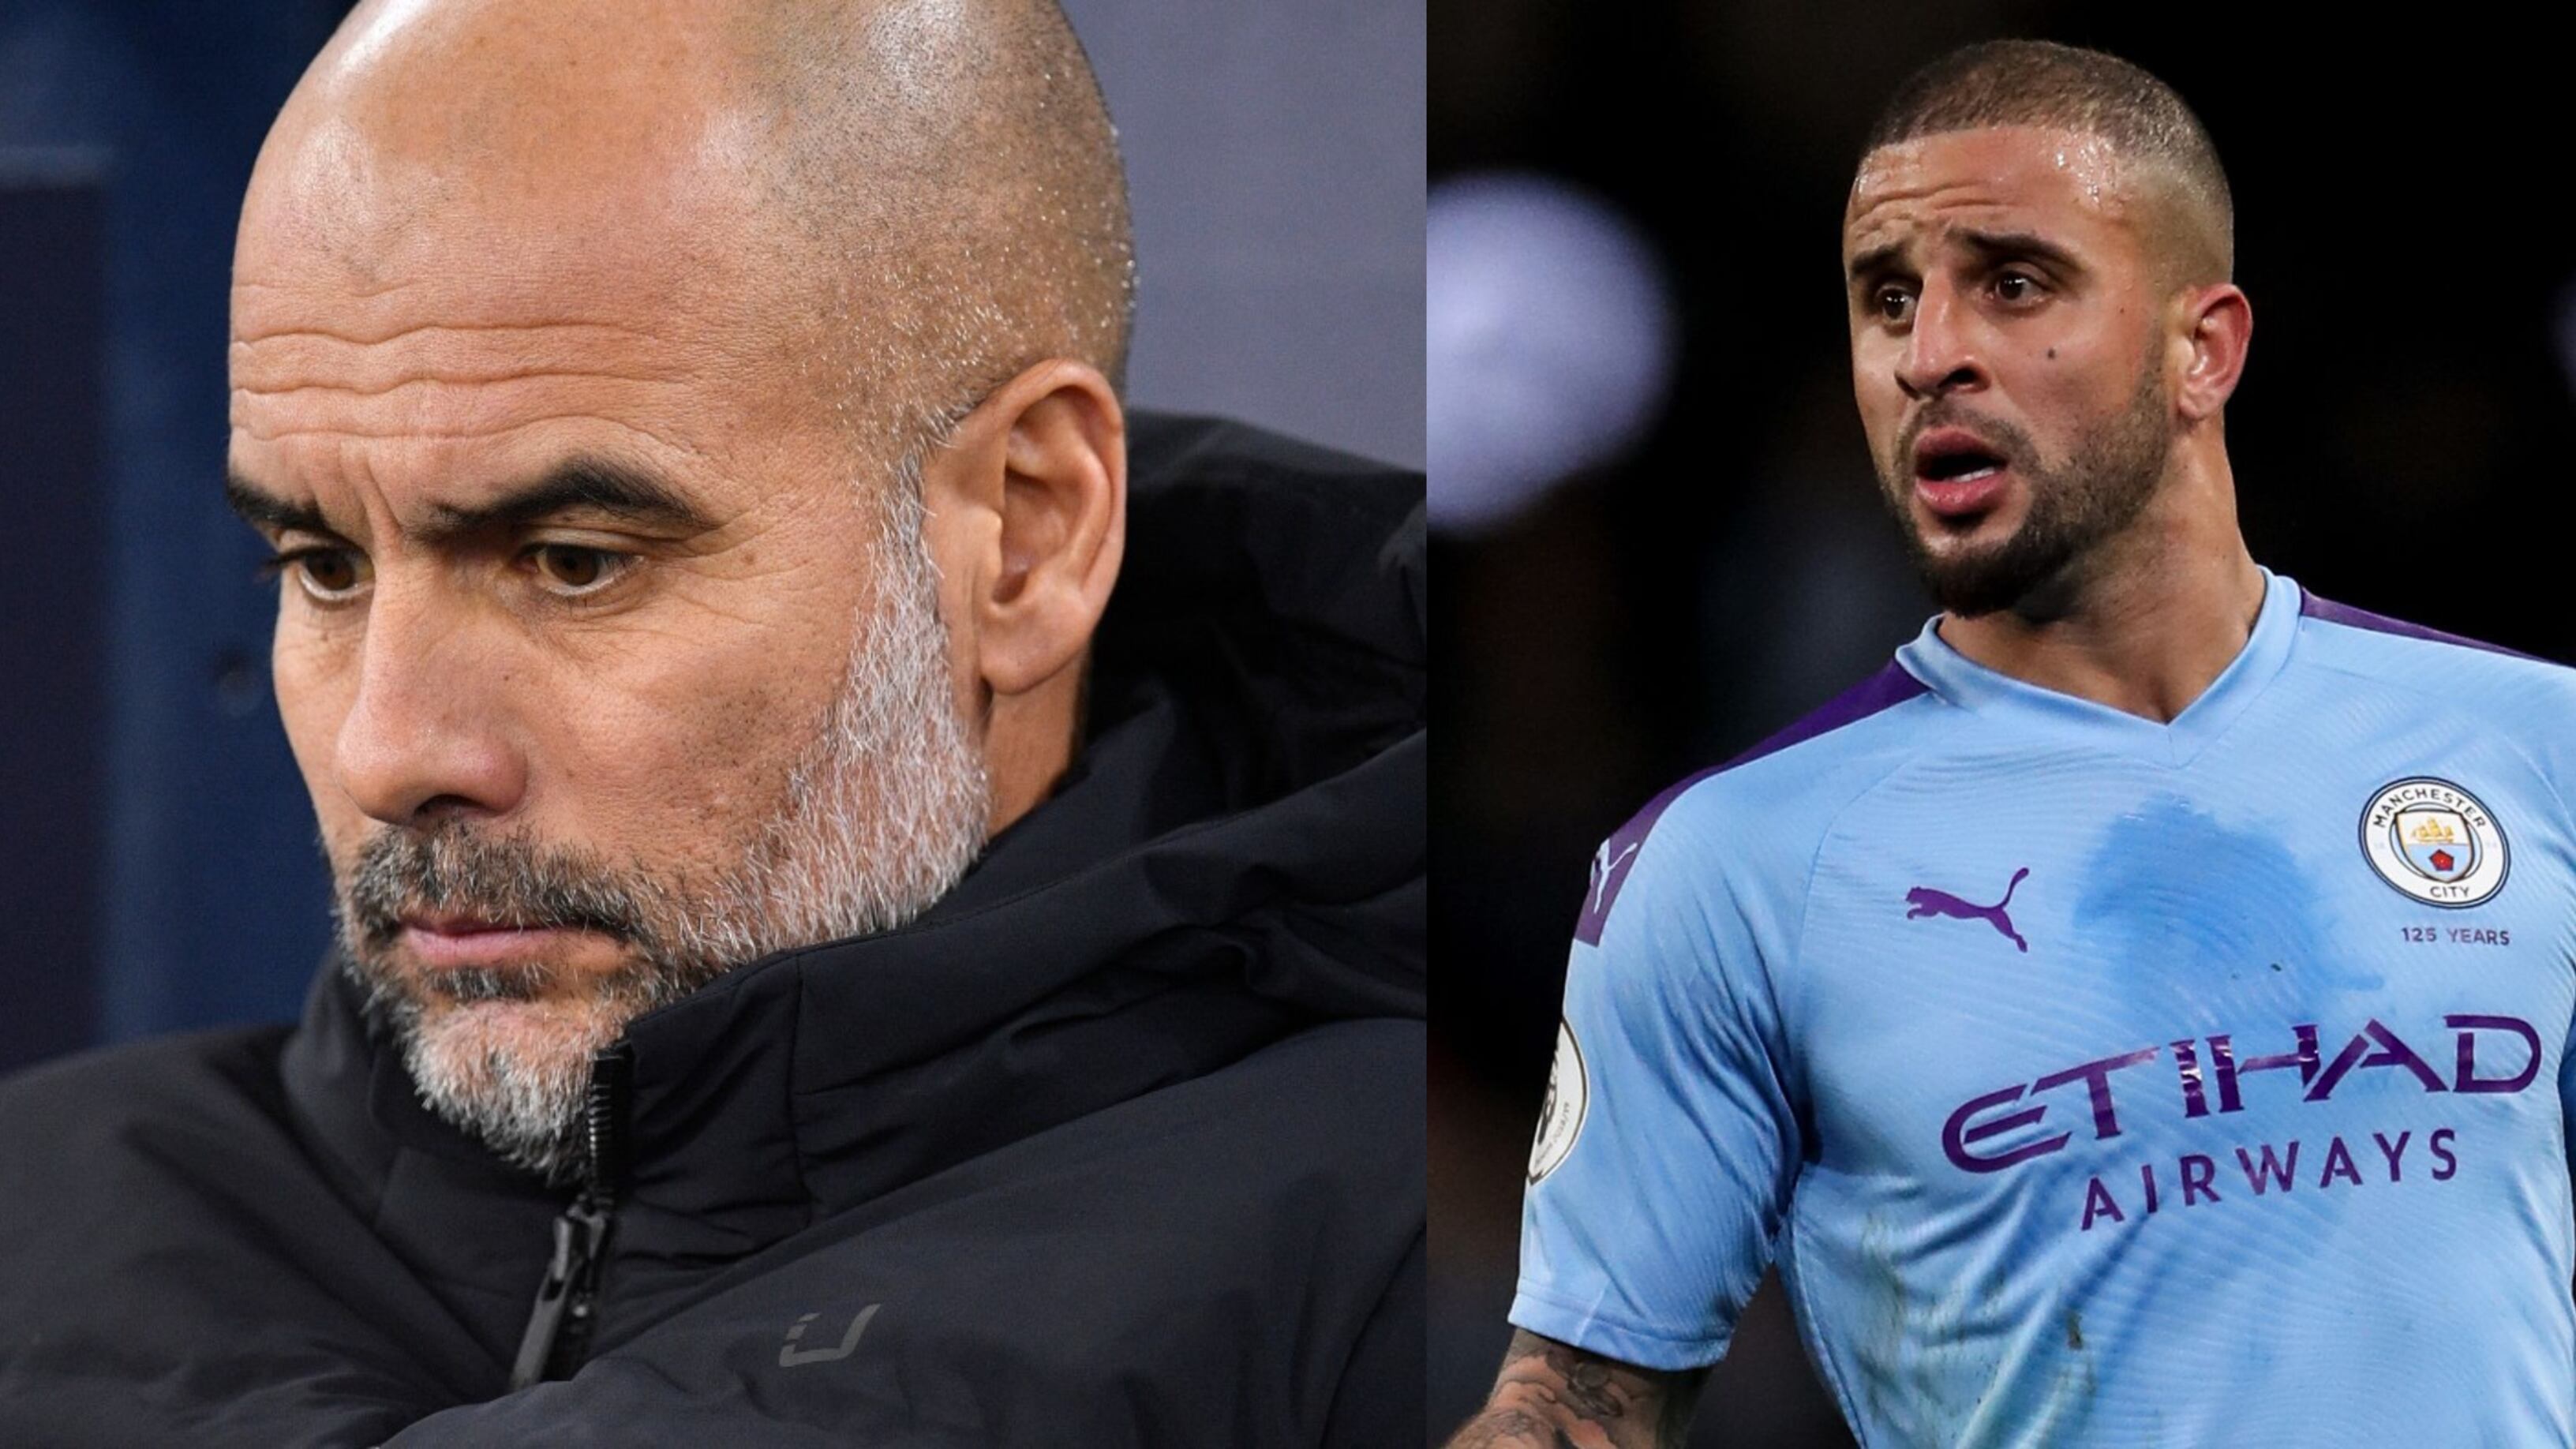 Guardiola trusted Walker and made him Man City skipper, but he betrayed Pep